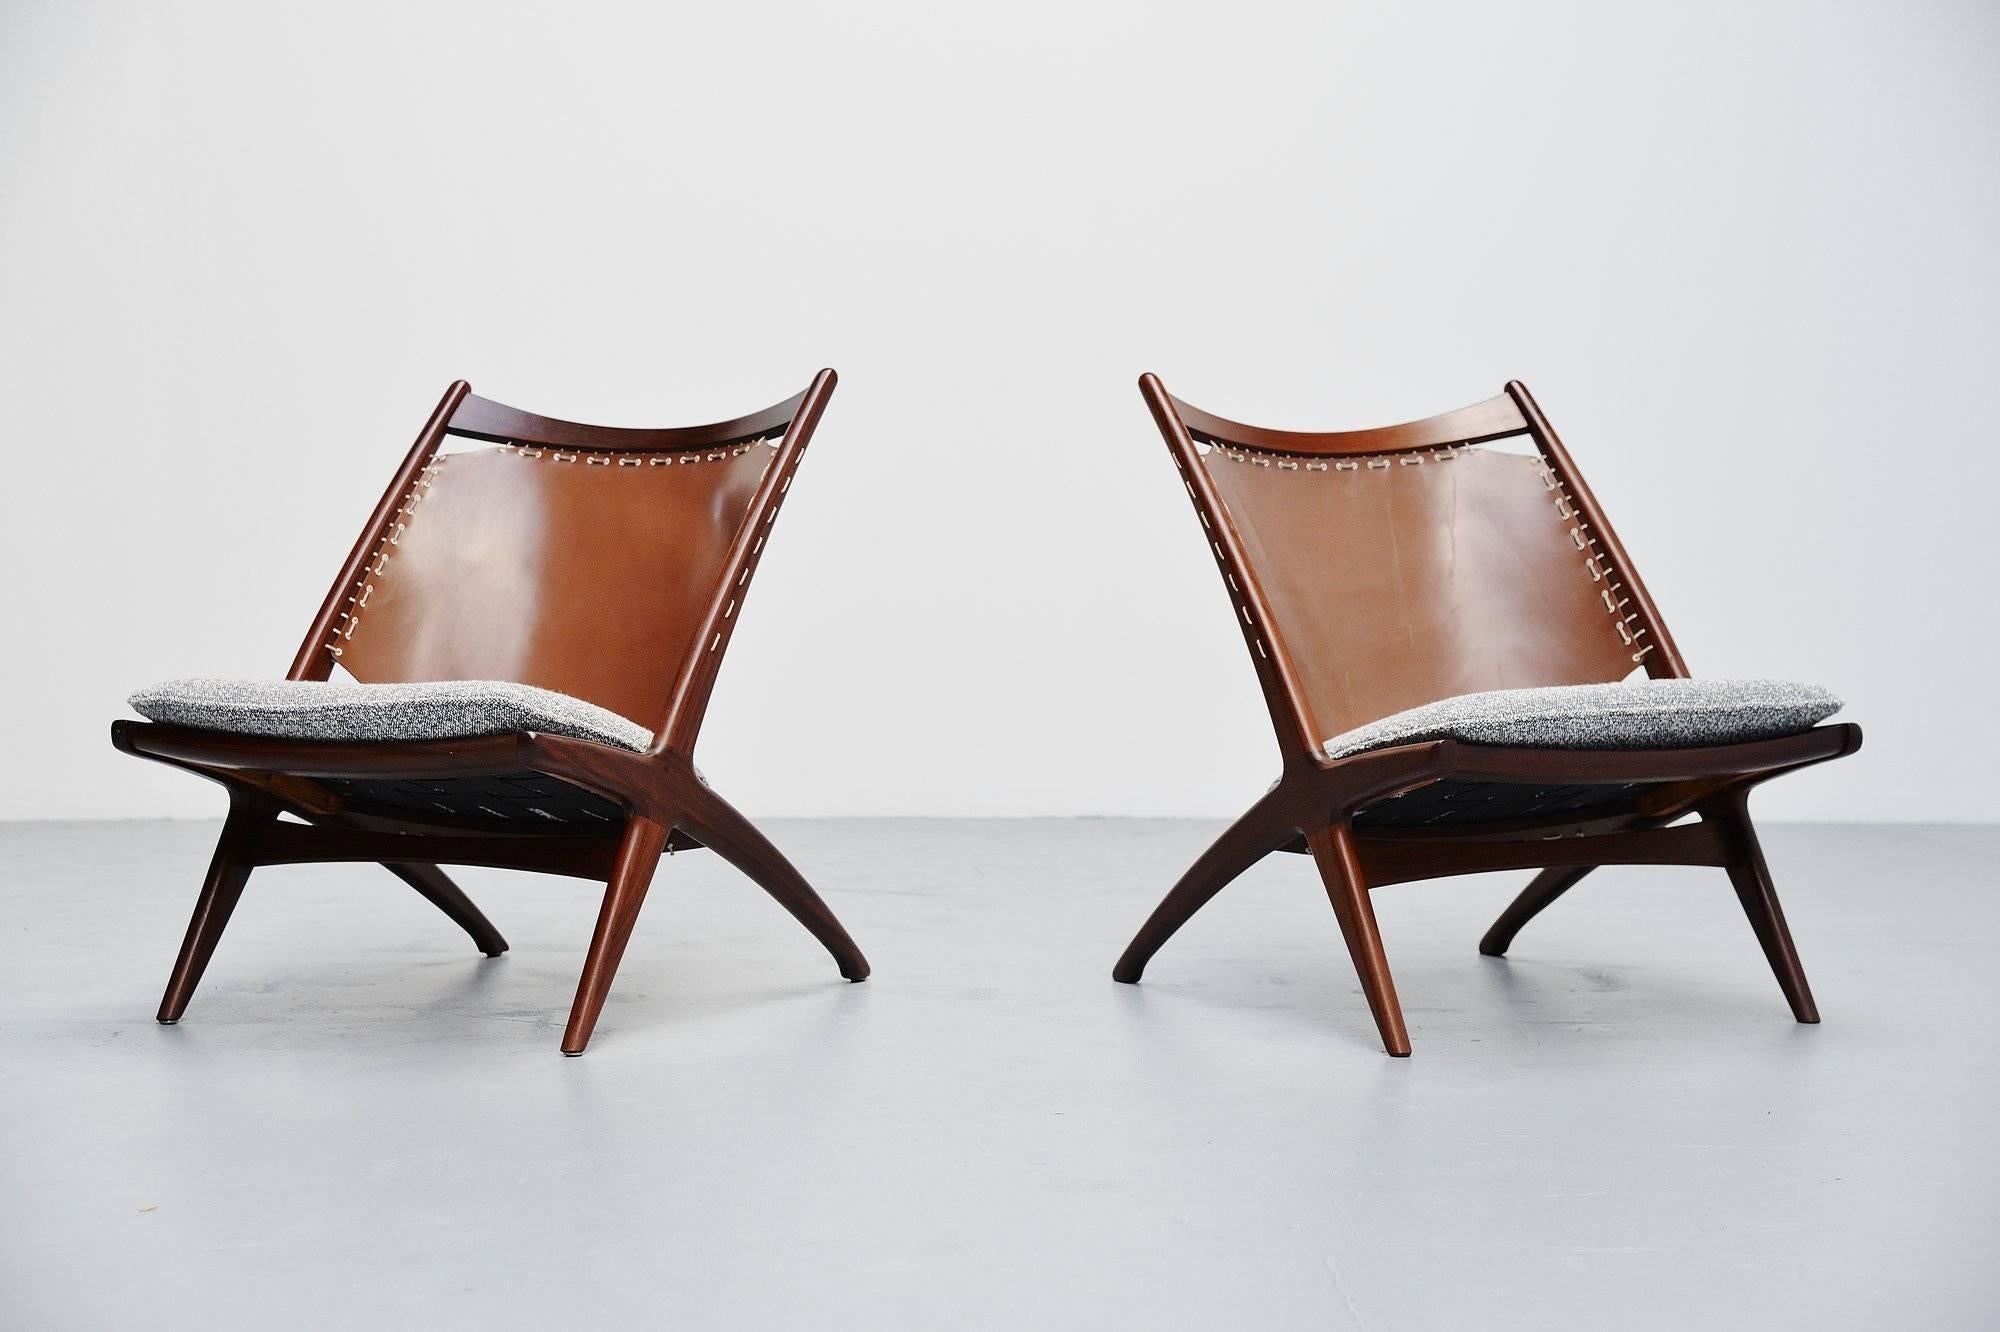 Rare pair of lounge chairs designed by Frederik Kayser and manufactured by Gustav Bahus, Norway, 1955. The chairs have a solid teak wooden frame and a very nice leather back fixed to the teak wooden frame with a white rope. The seats are